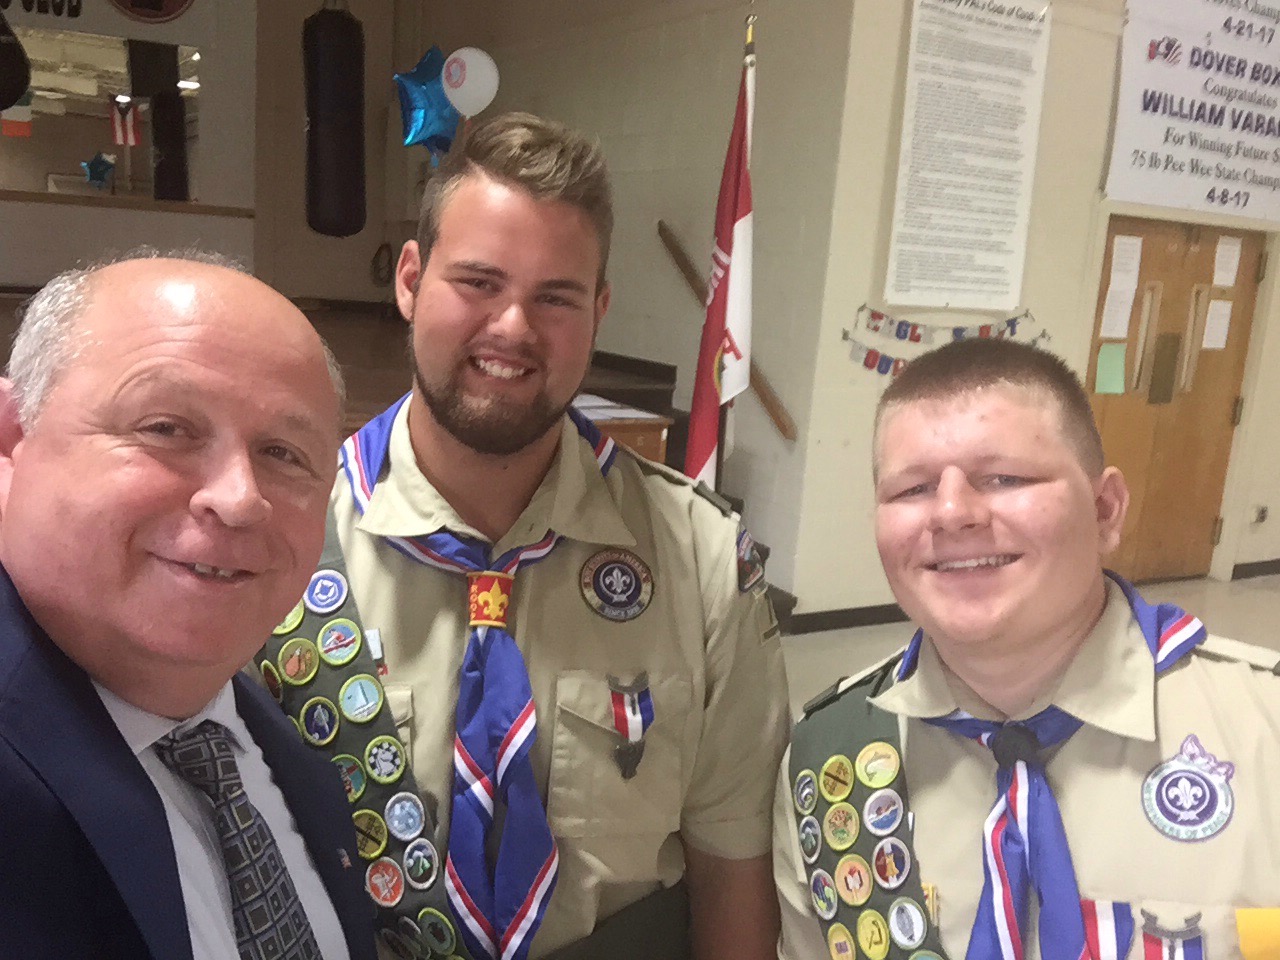 Two Brothers from Parsippany Join the Rank of Eagle Scout!